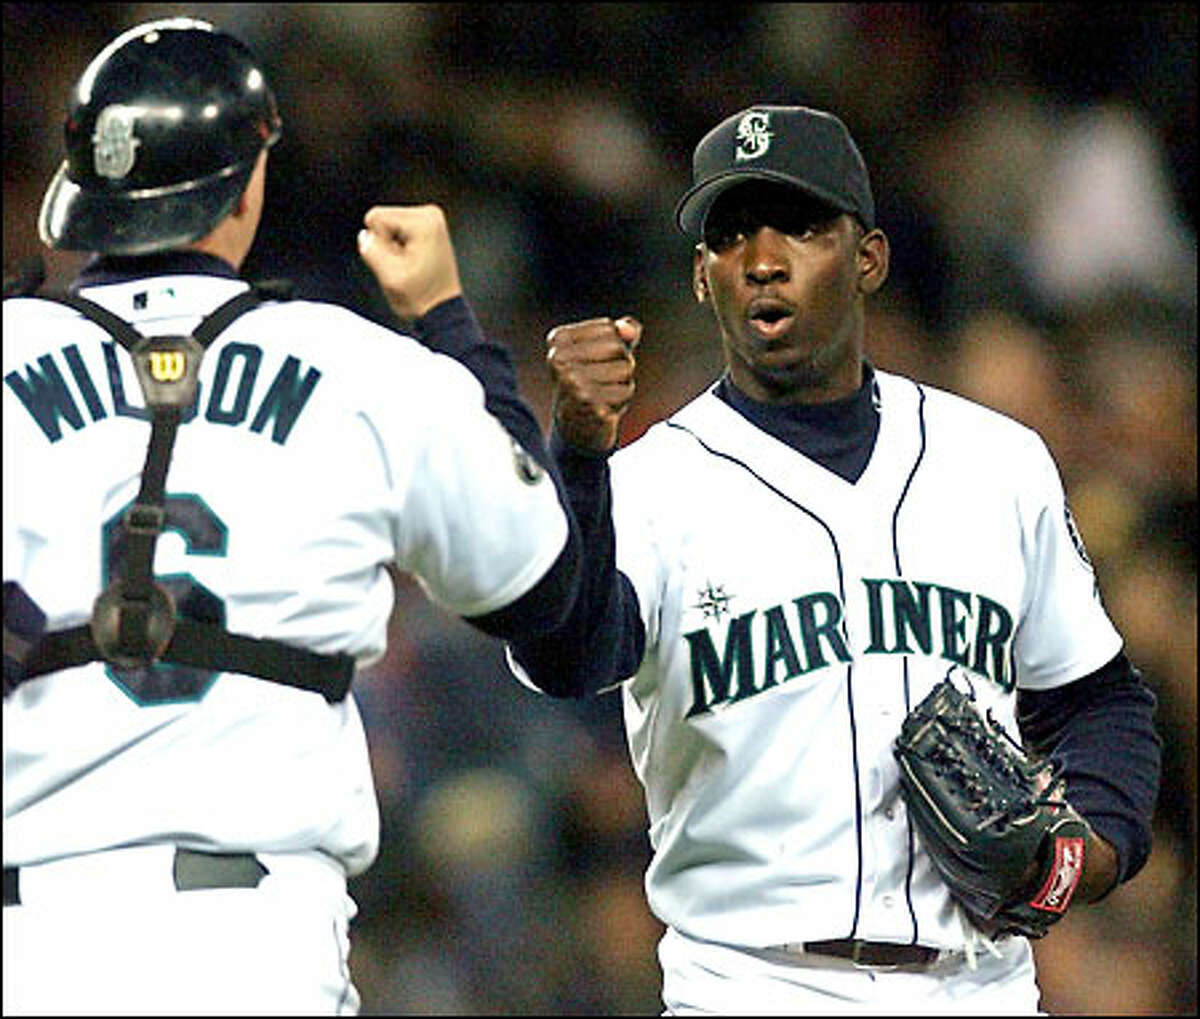 Dan Wilson gives Rafael Soriano a celebratory fist-bump after the rookie right-hander recorded his first save in the Mariners 7-2 victory. Soriano pitched three scoreless innings, allowing two hits.